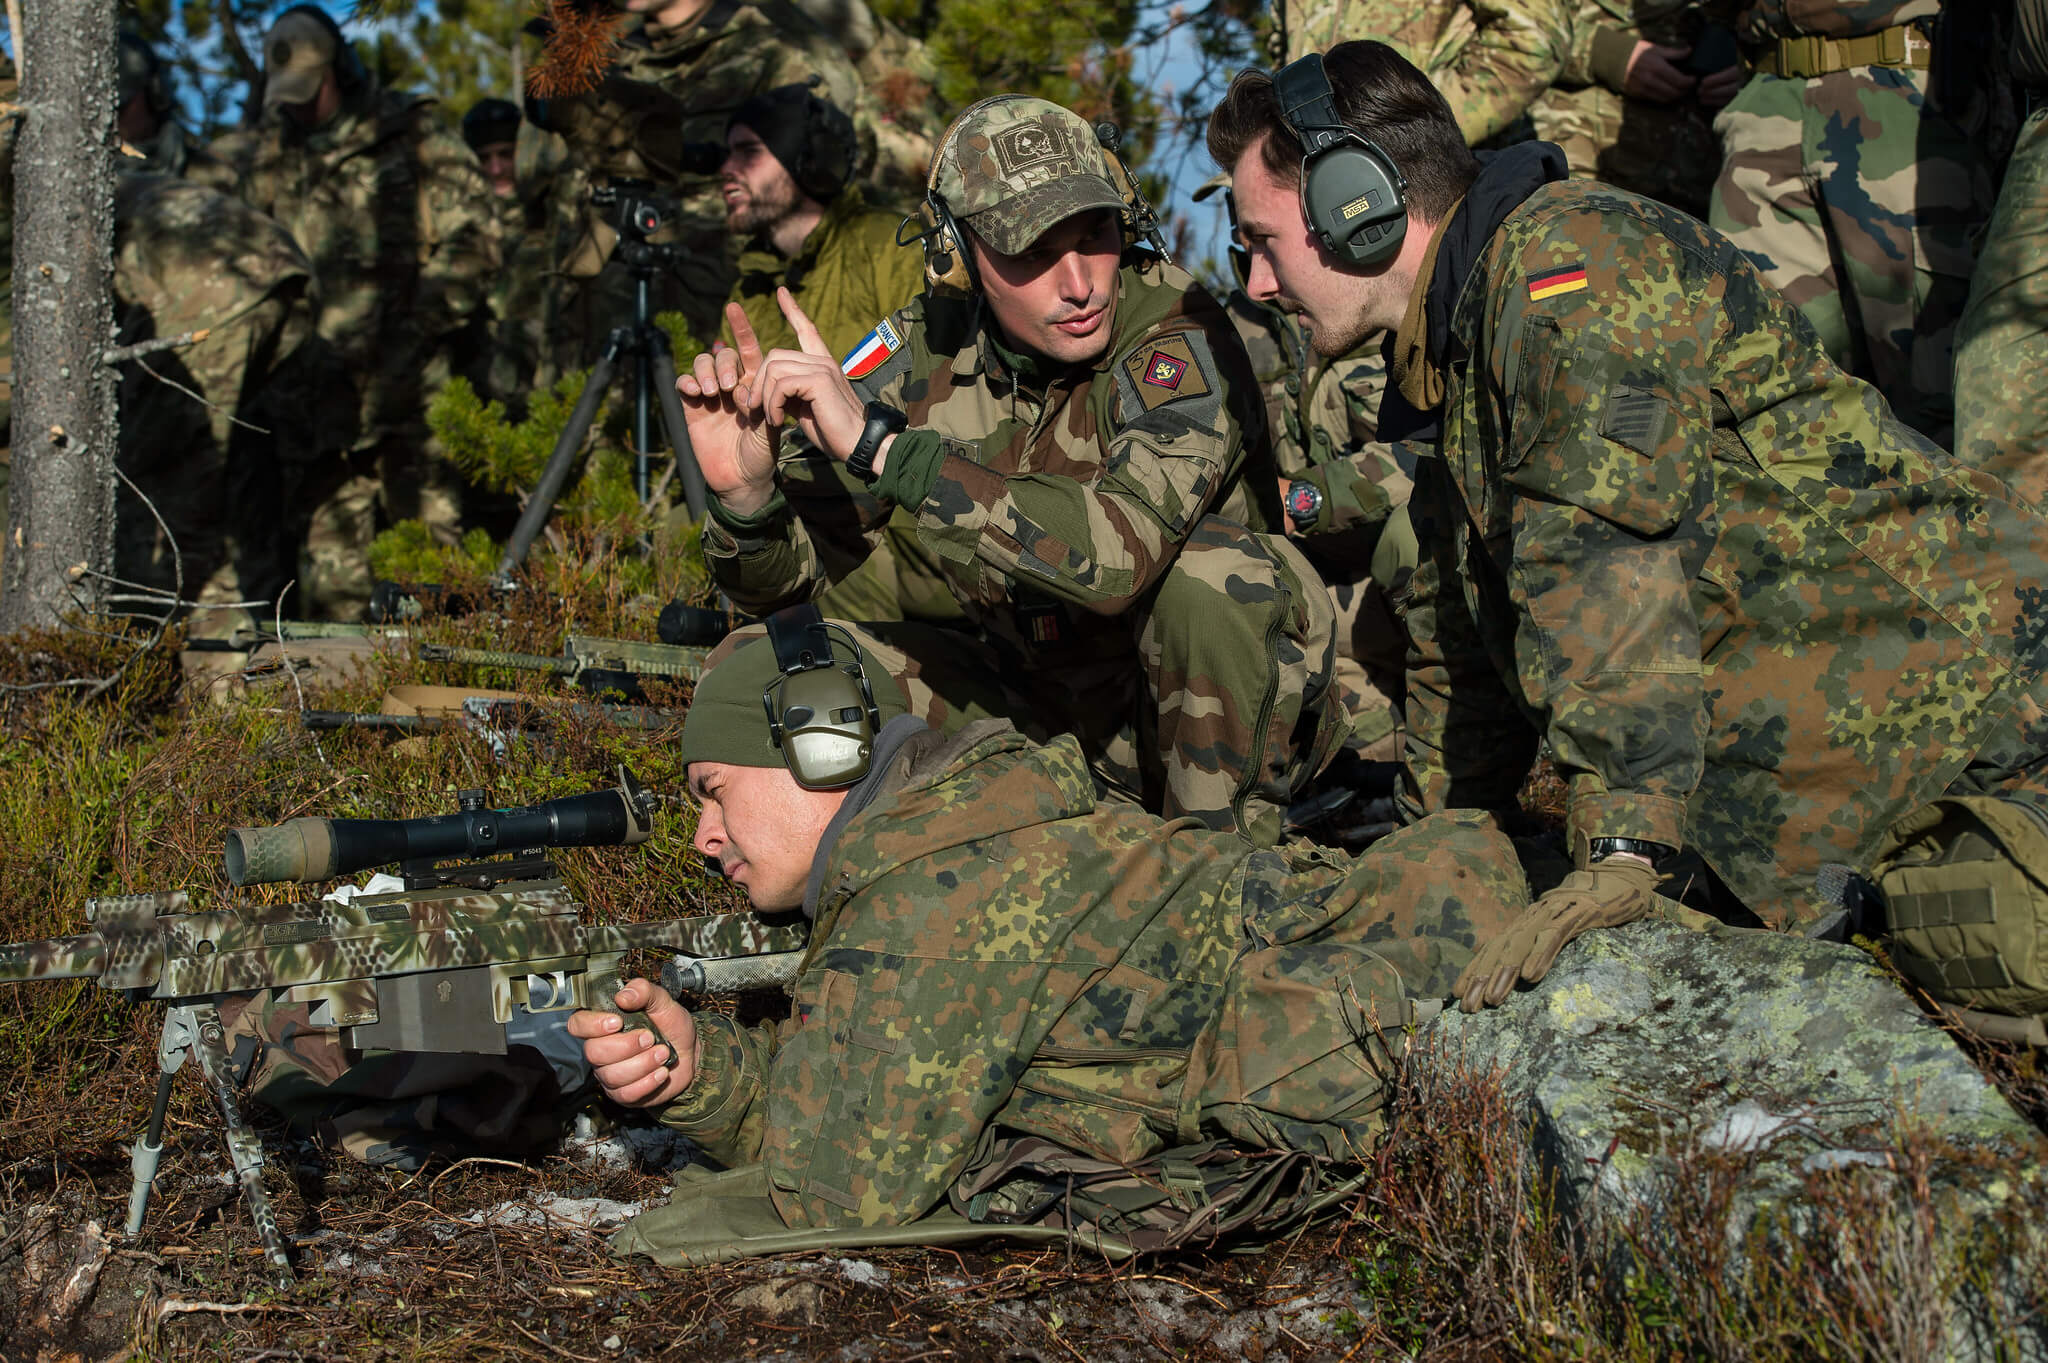 Heisbourg- As part of NATO Exercise Trident Juncture 2018, French and German snipers conduct a joint sniper training in Norway in 2018. NATO